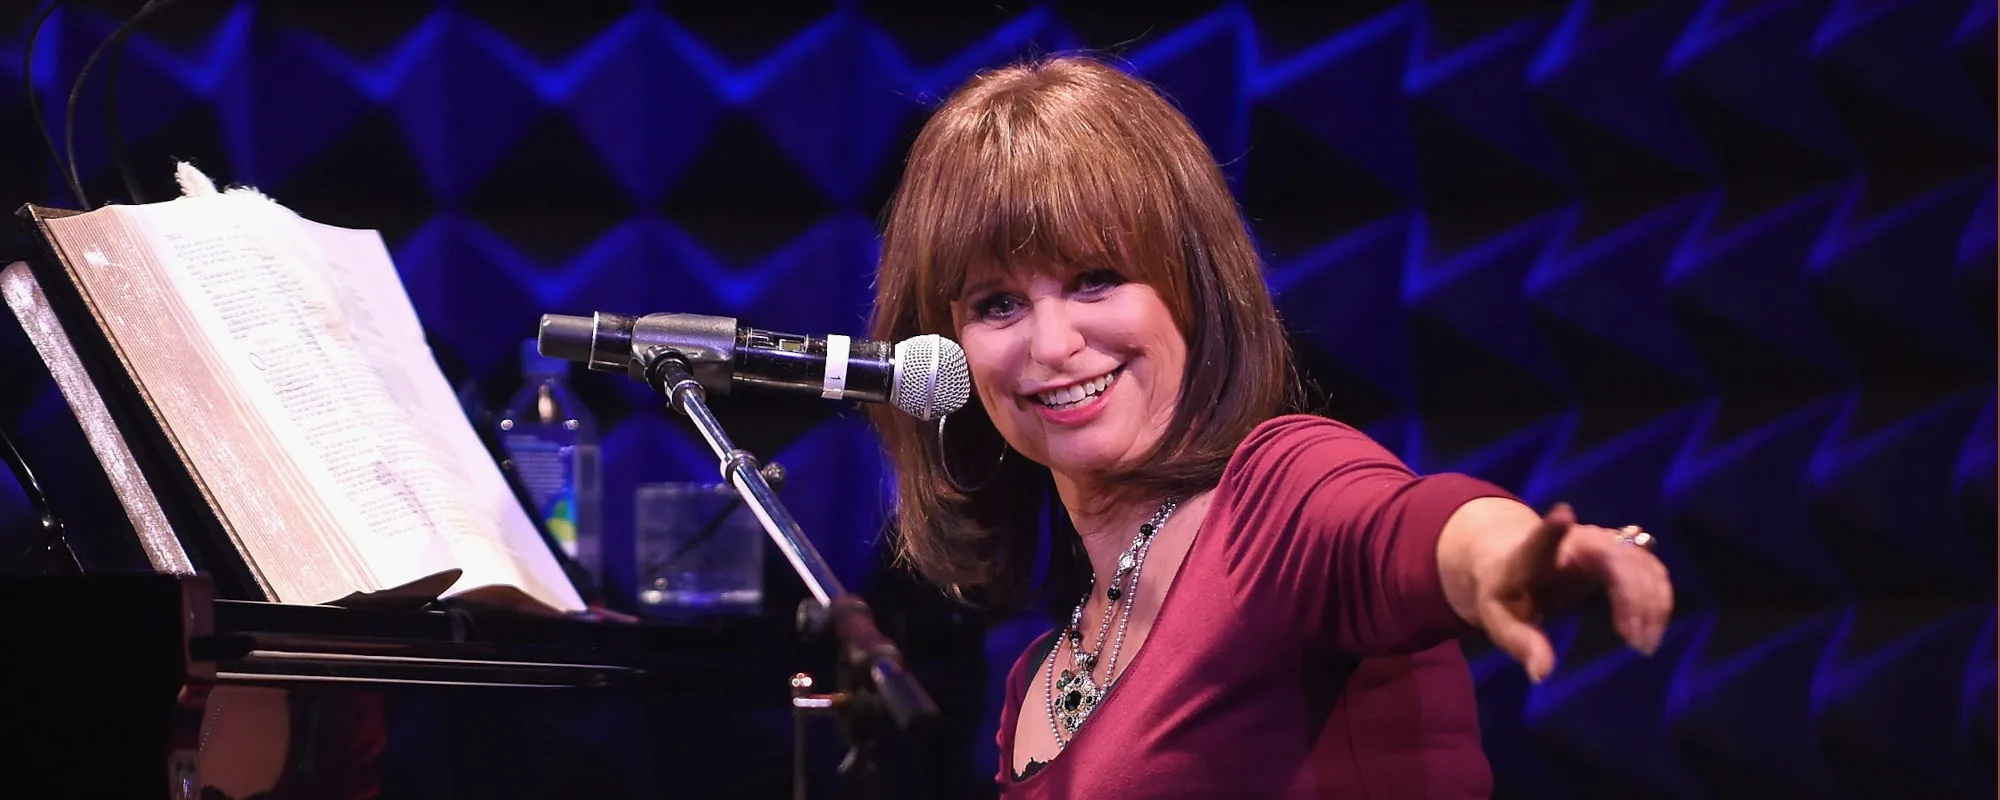 The Meaning Behind Jessi Colter’s Declarative “I’m Not Lisa”